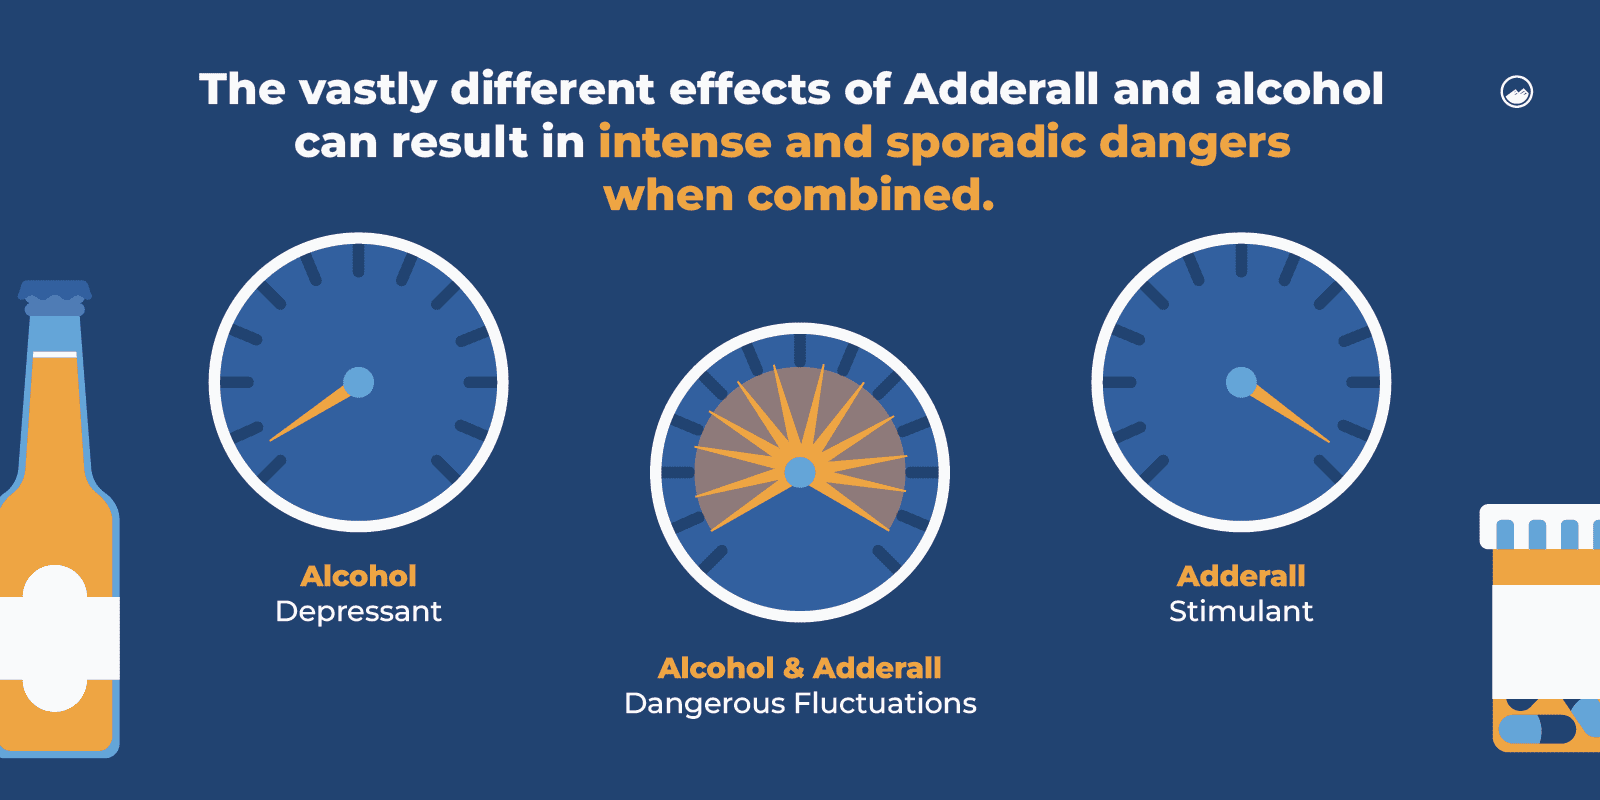 Alcohol And Adderall Graphics 05 Dangerous Fluctuations Of Alcohol And Adderall Inline Image